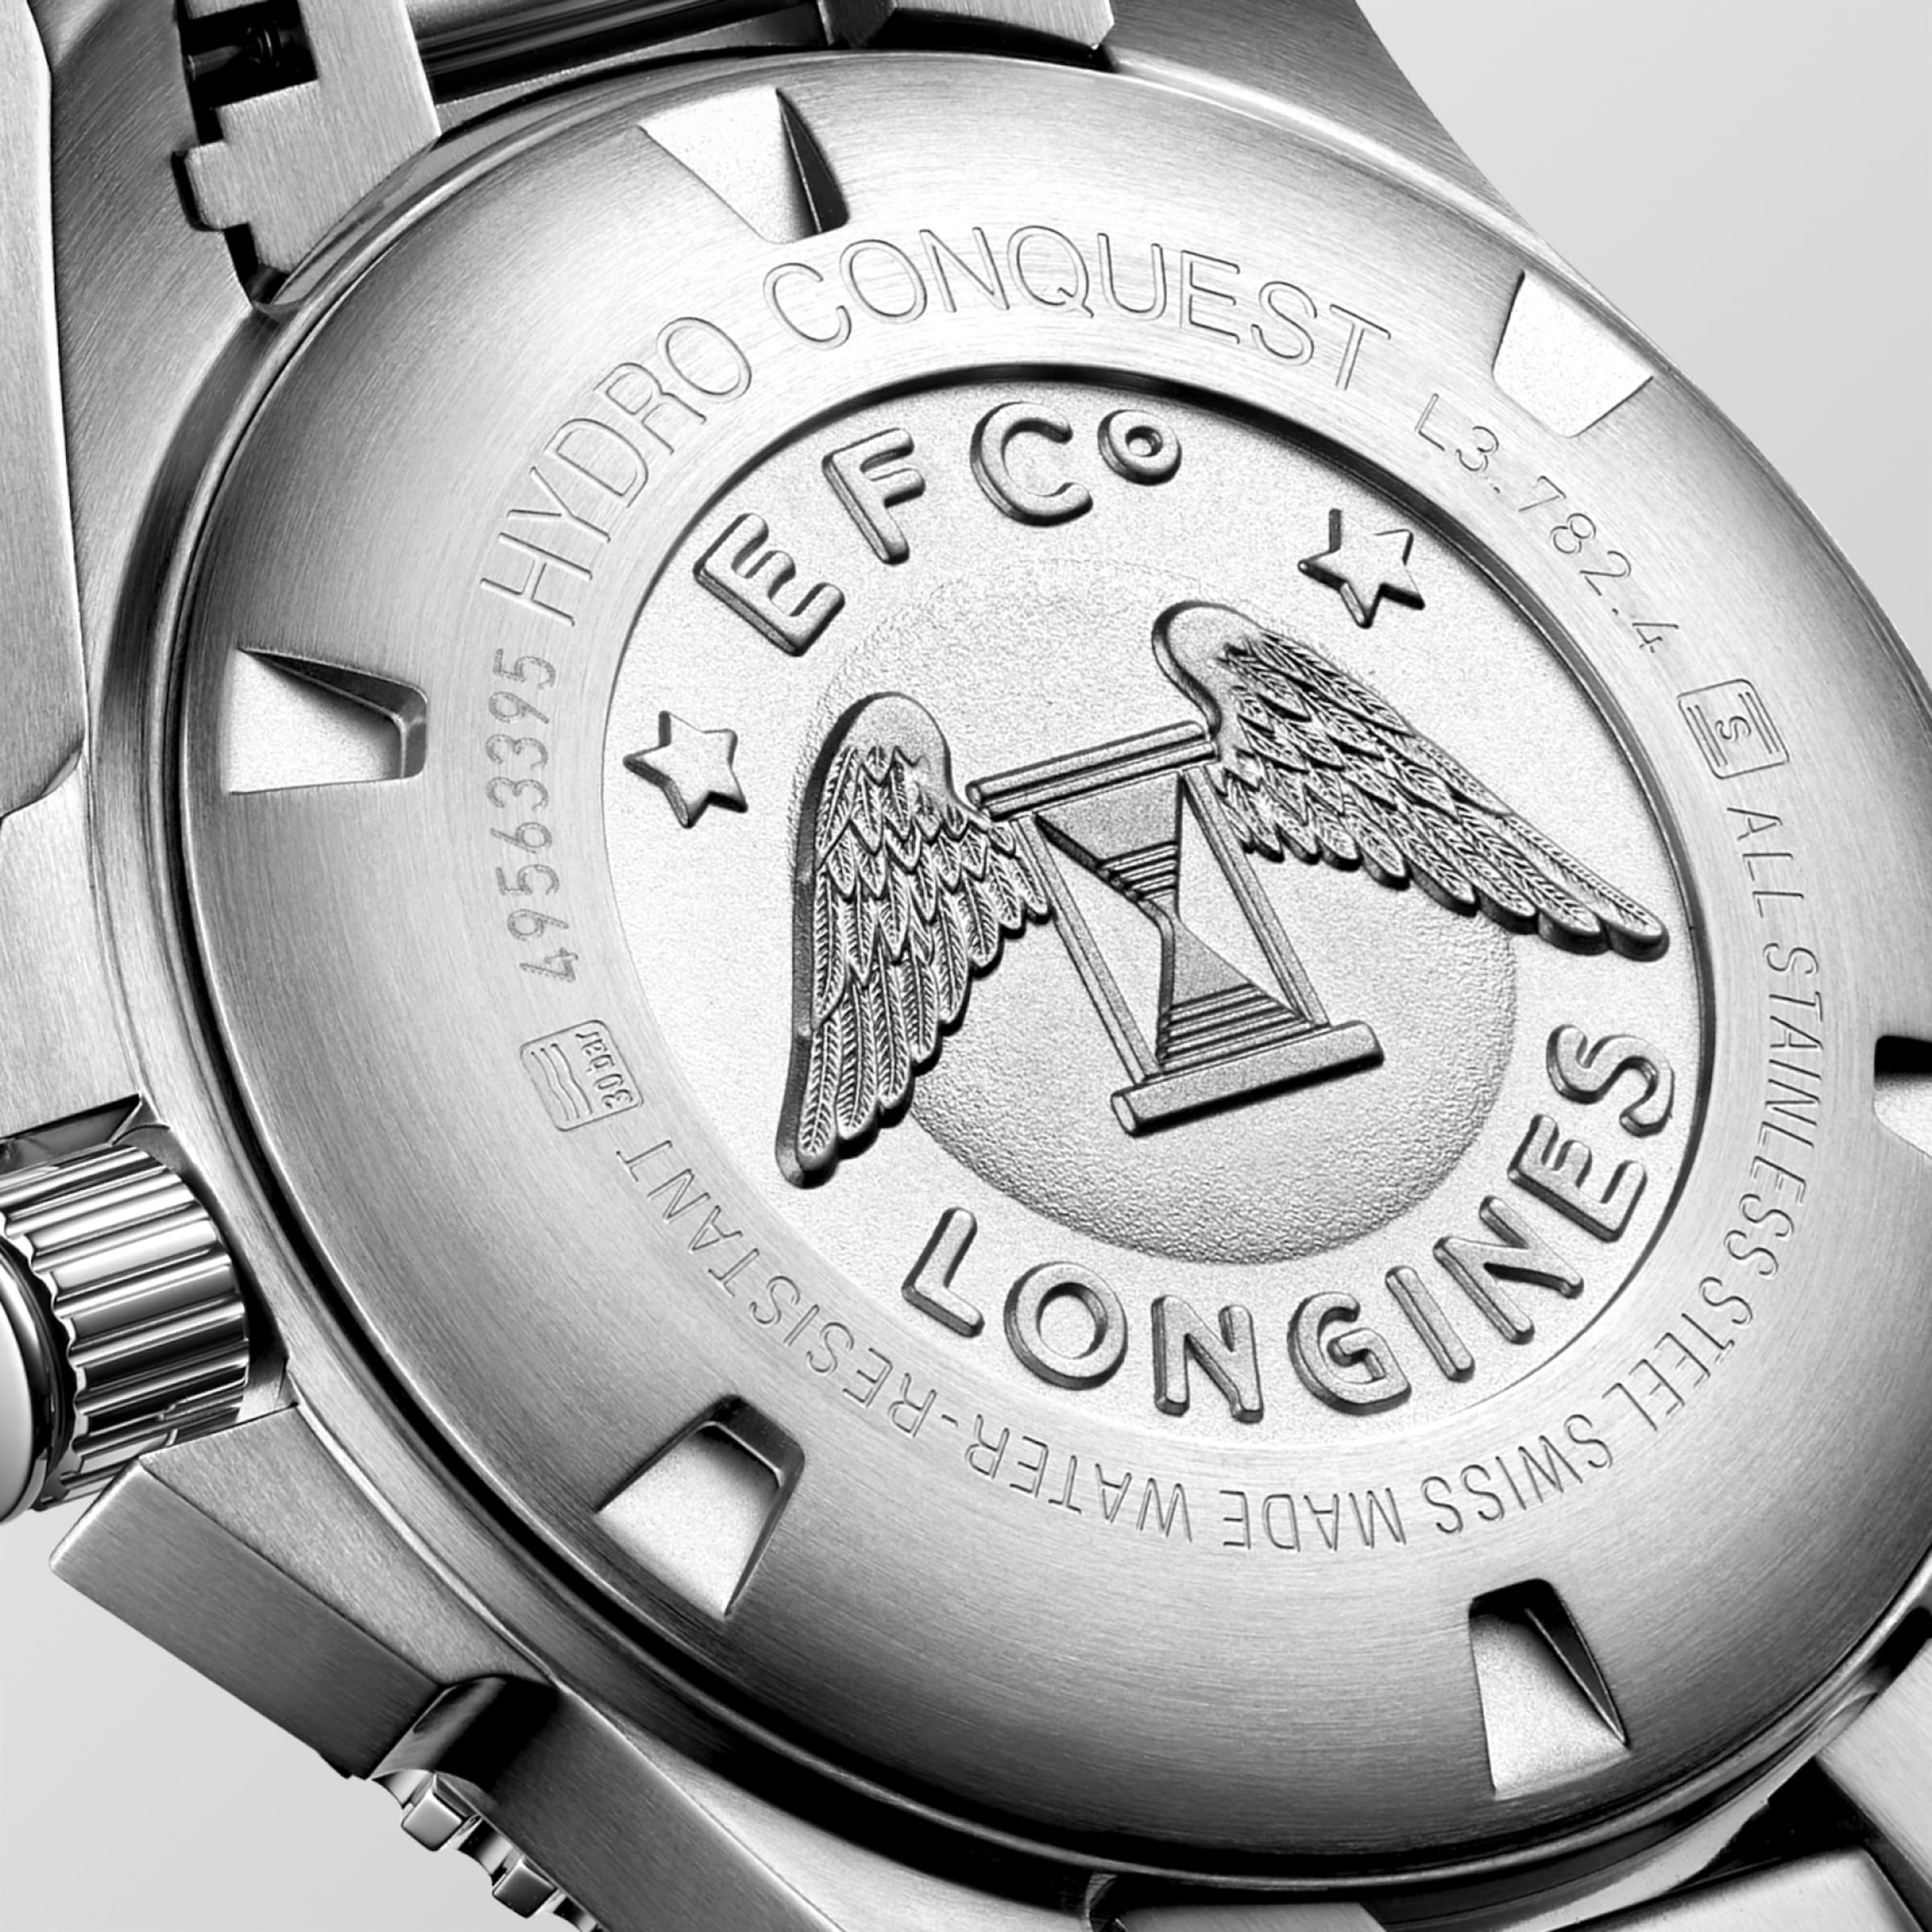 Longines HYDROCONQUEST Automatic Stainless steel and ceramic bezel Watch - L3.782.4.96.6